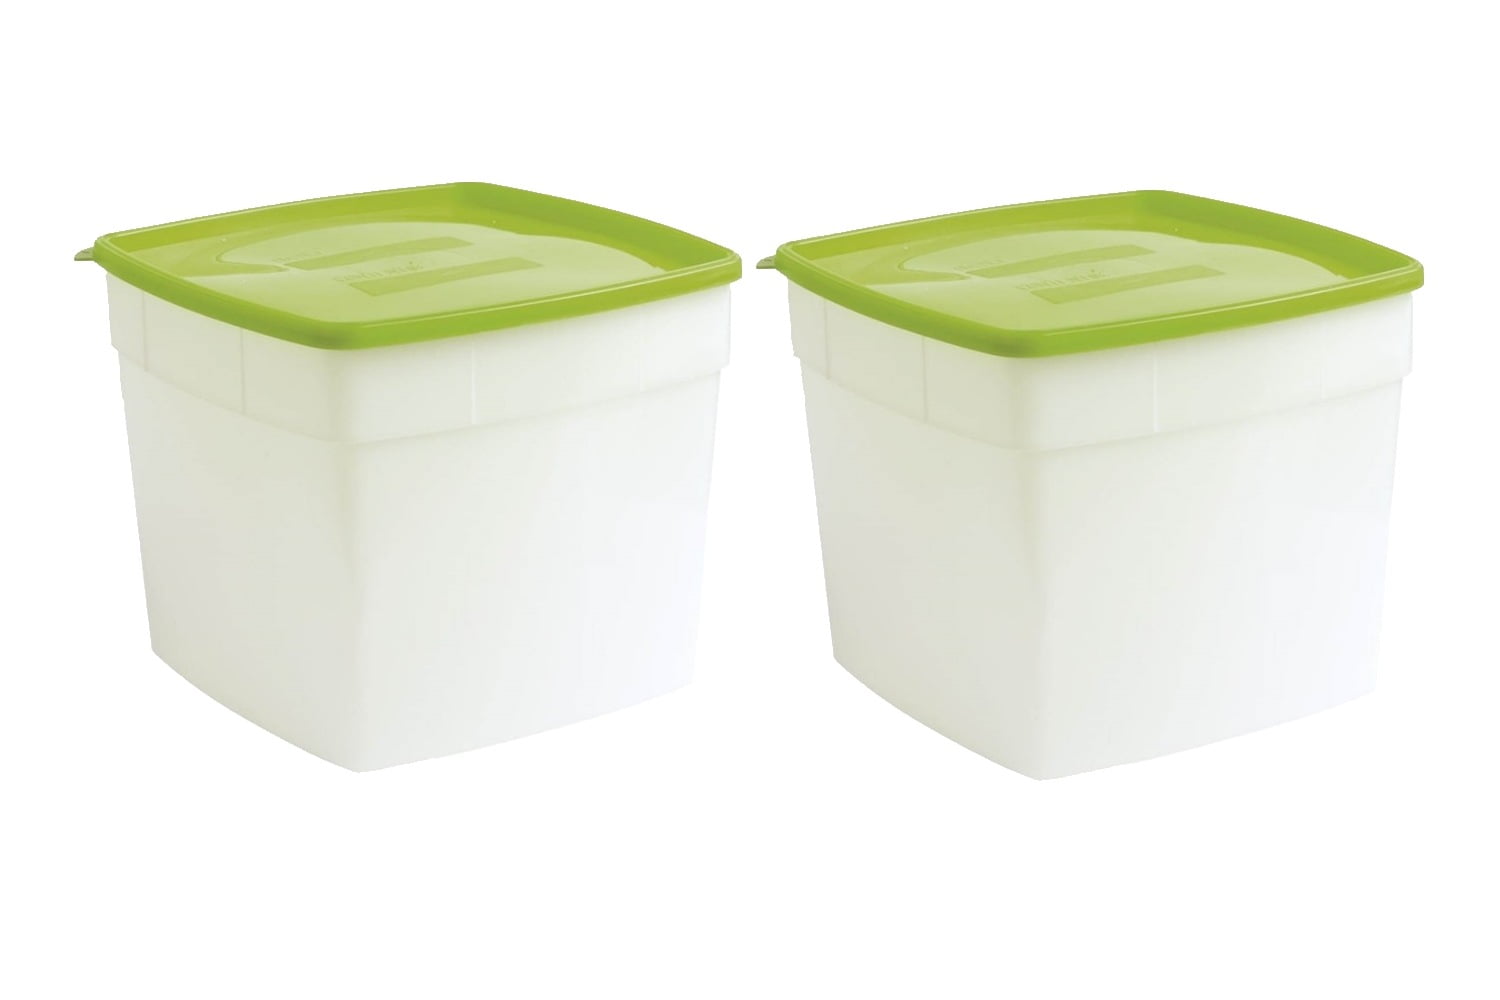  Arrow Home Products 00044 1-Quart Freezer Containers, 3-Pack,  White/green : Home & Kitchen